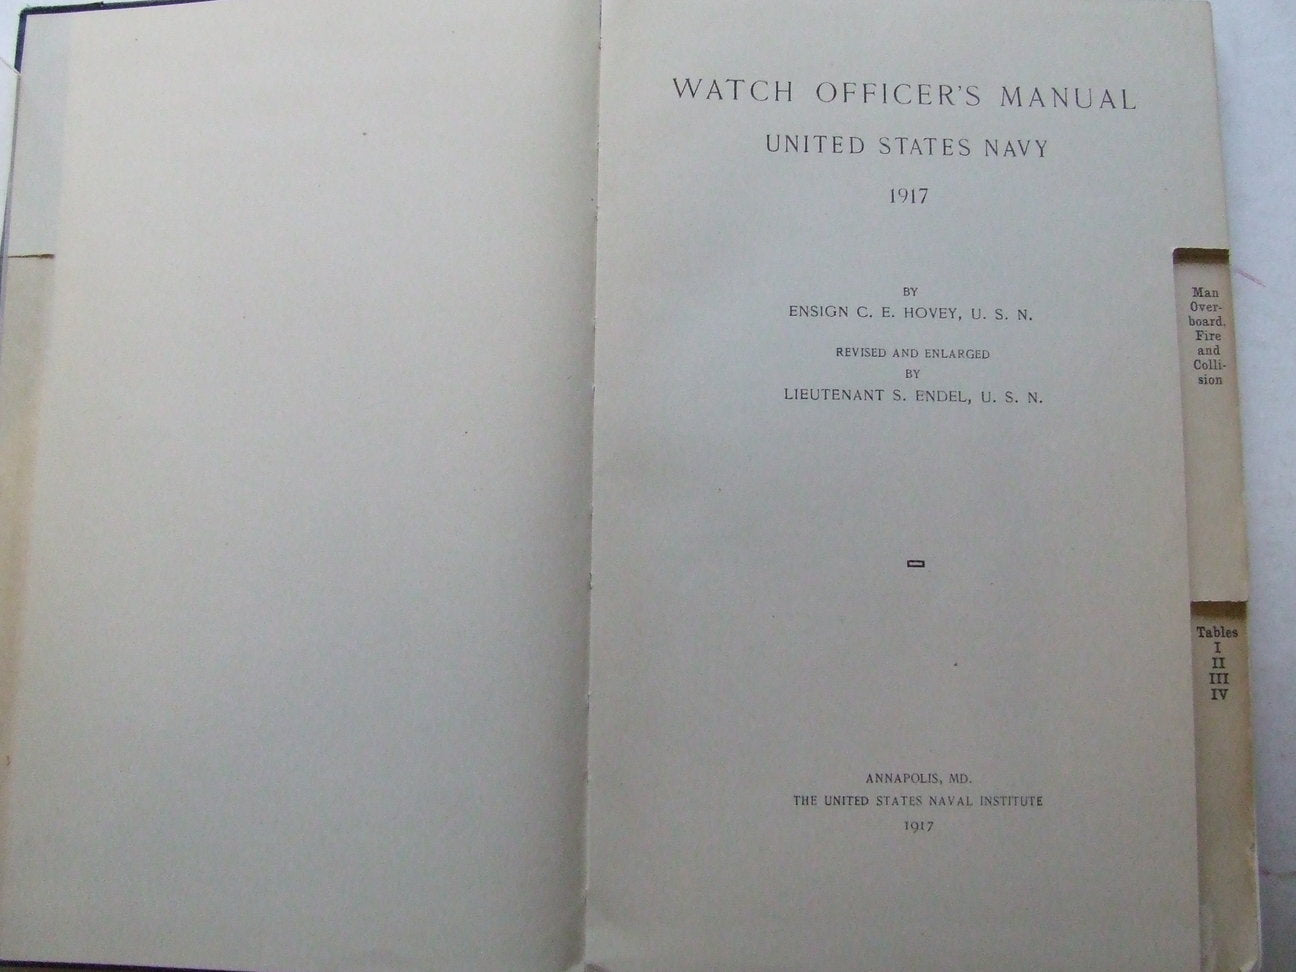 Watch Officer's Manual, United States Navy, 1917